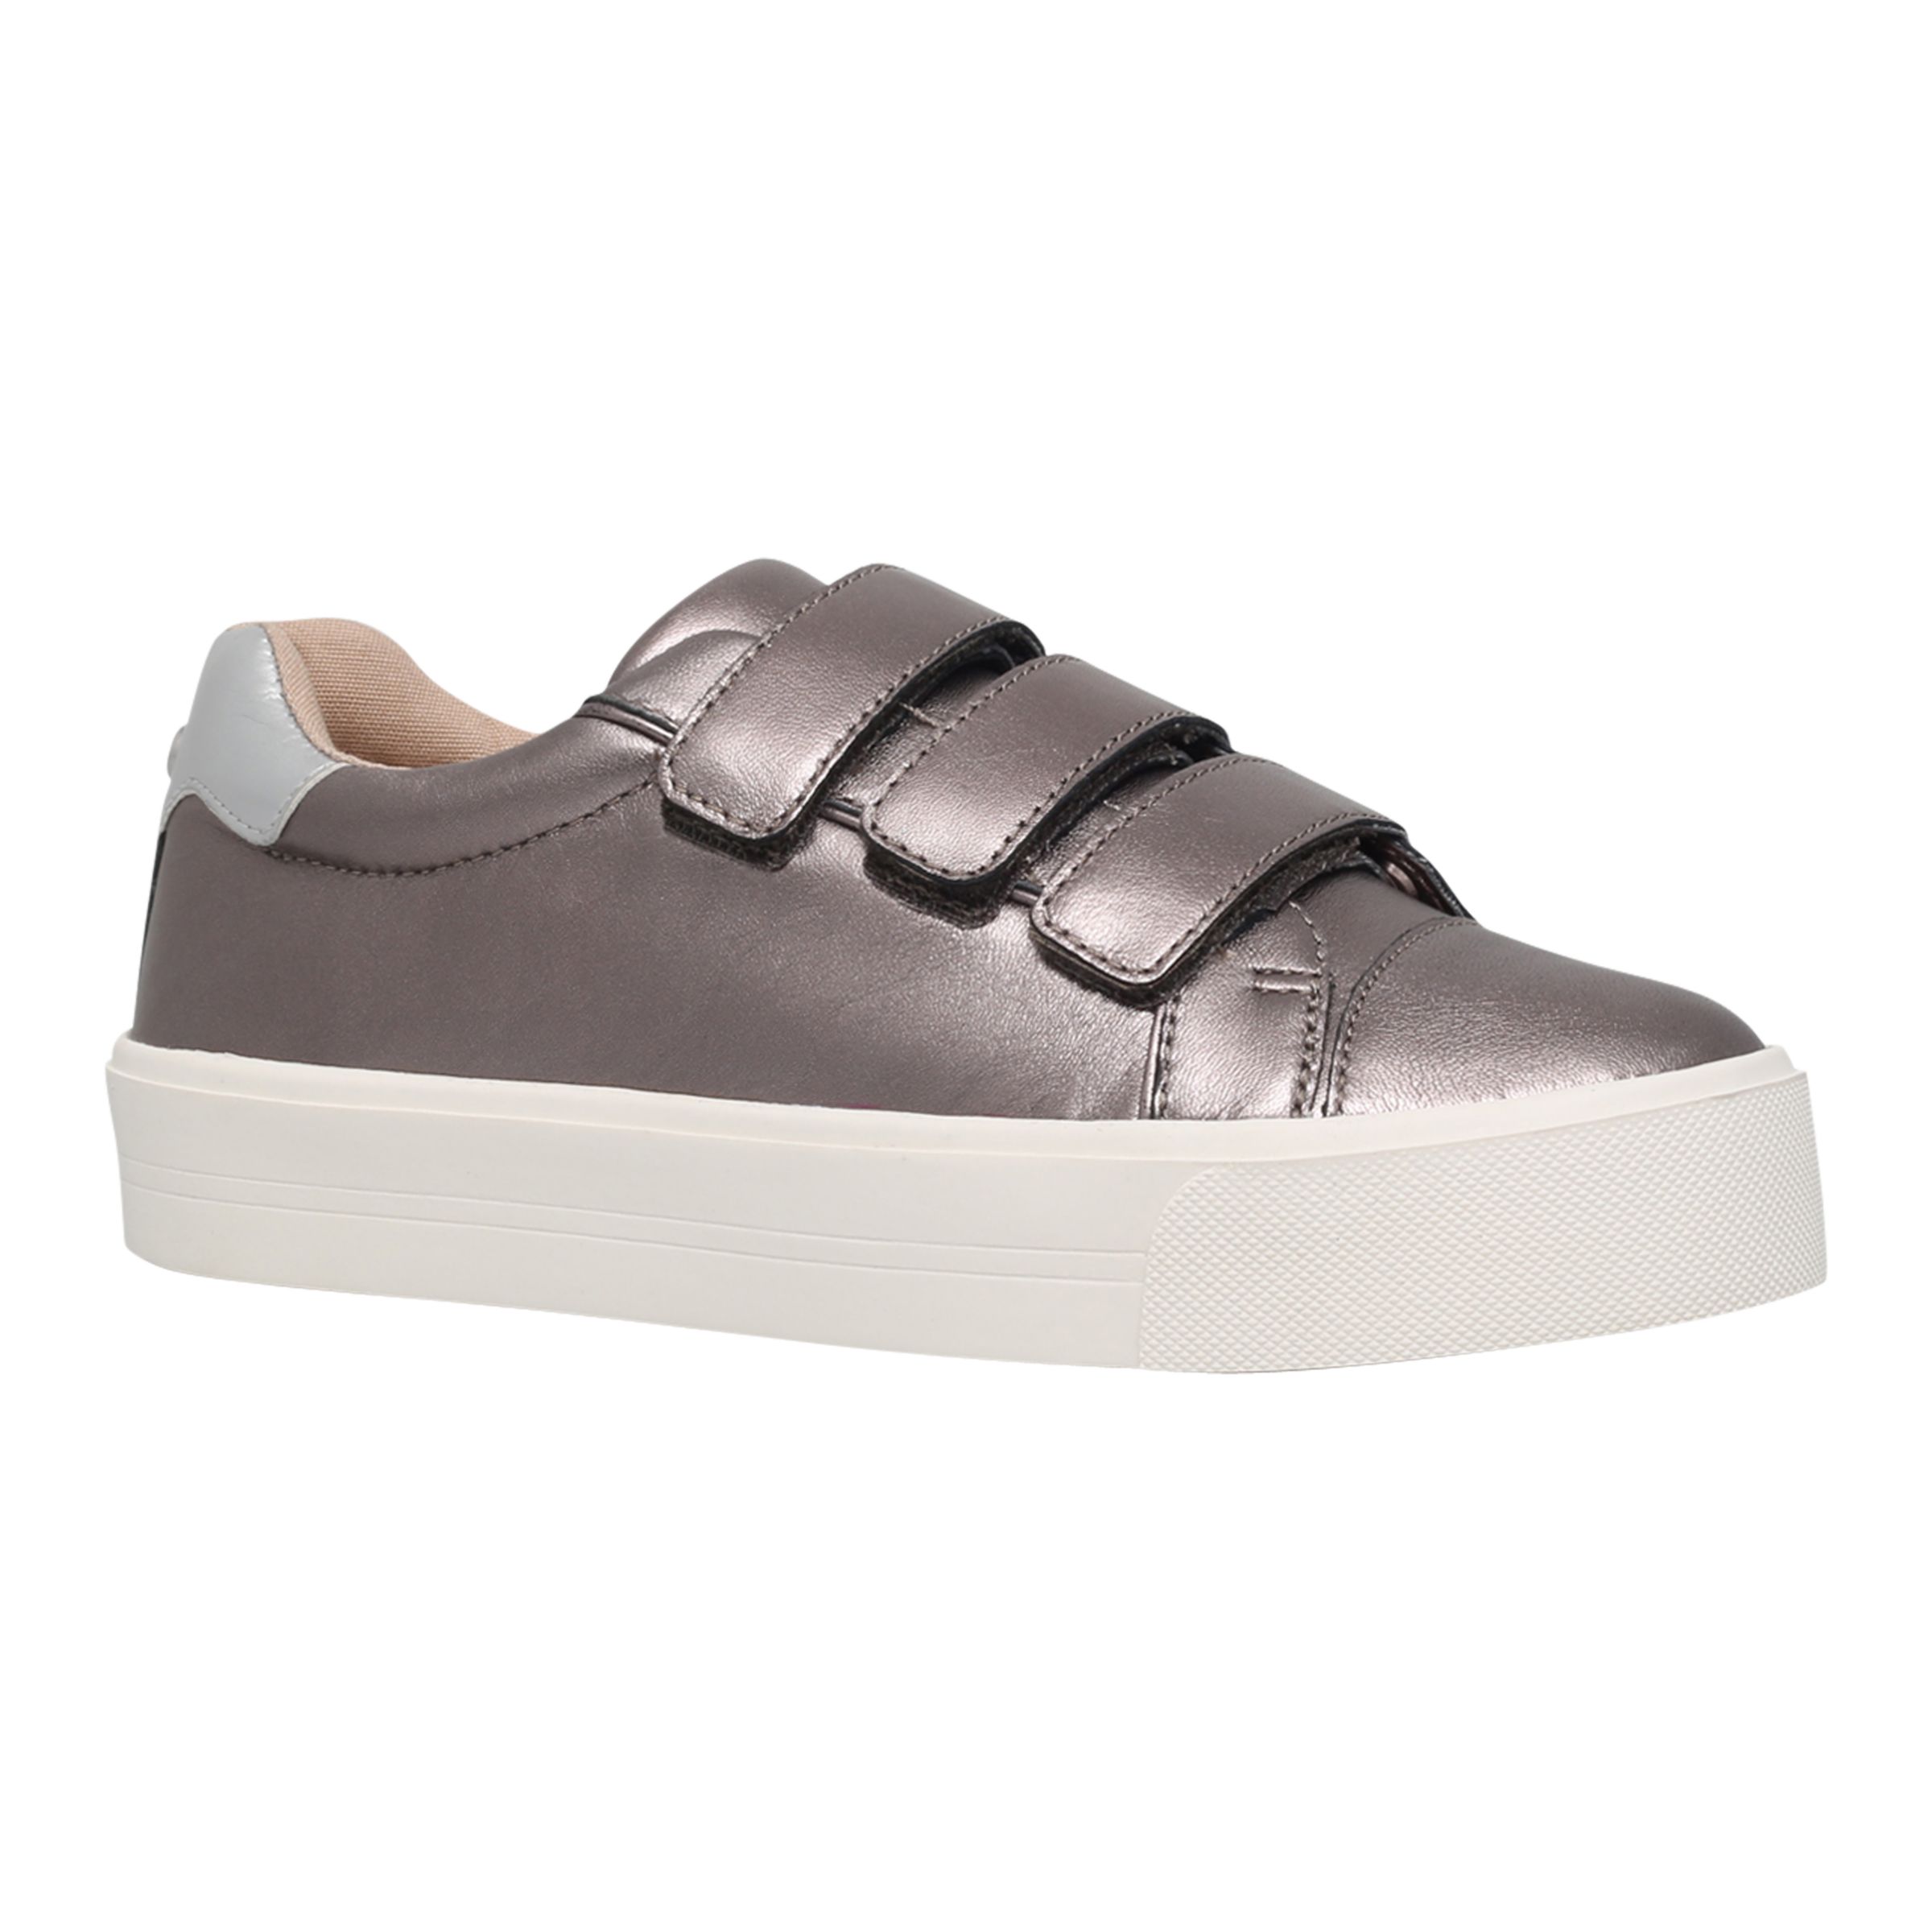 Carvela Lily Leather Sports Shoes